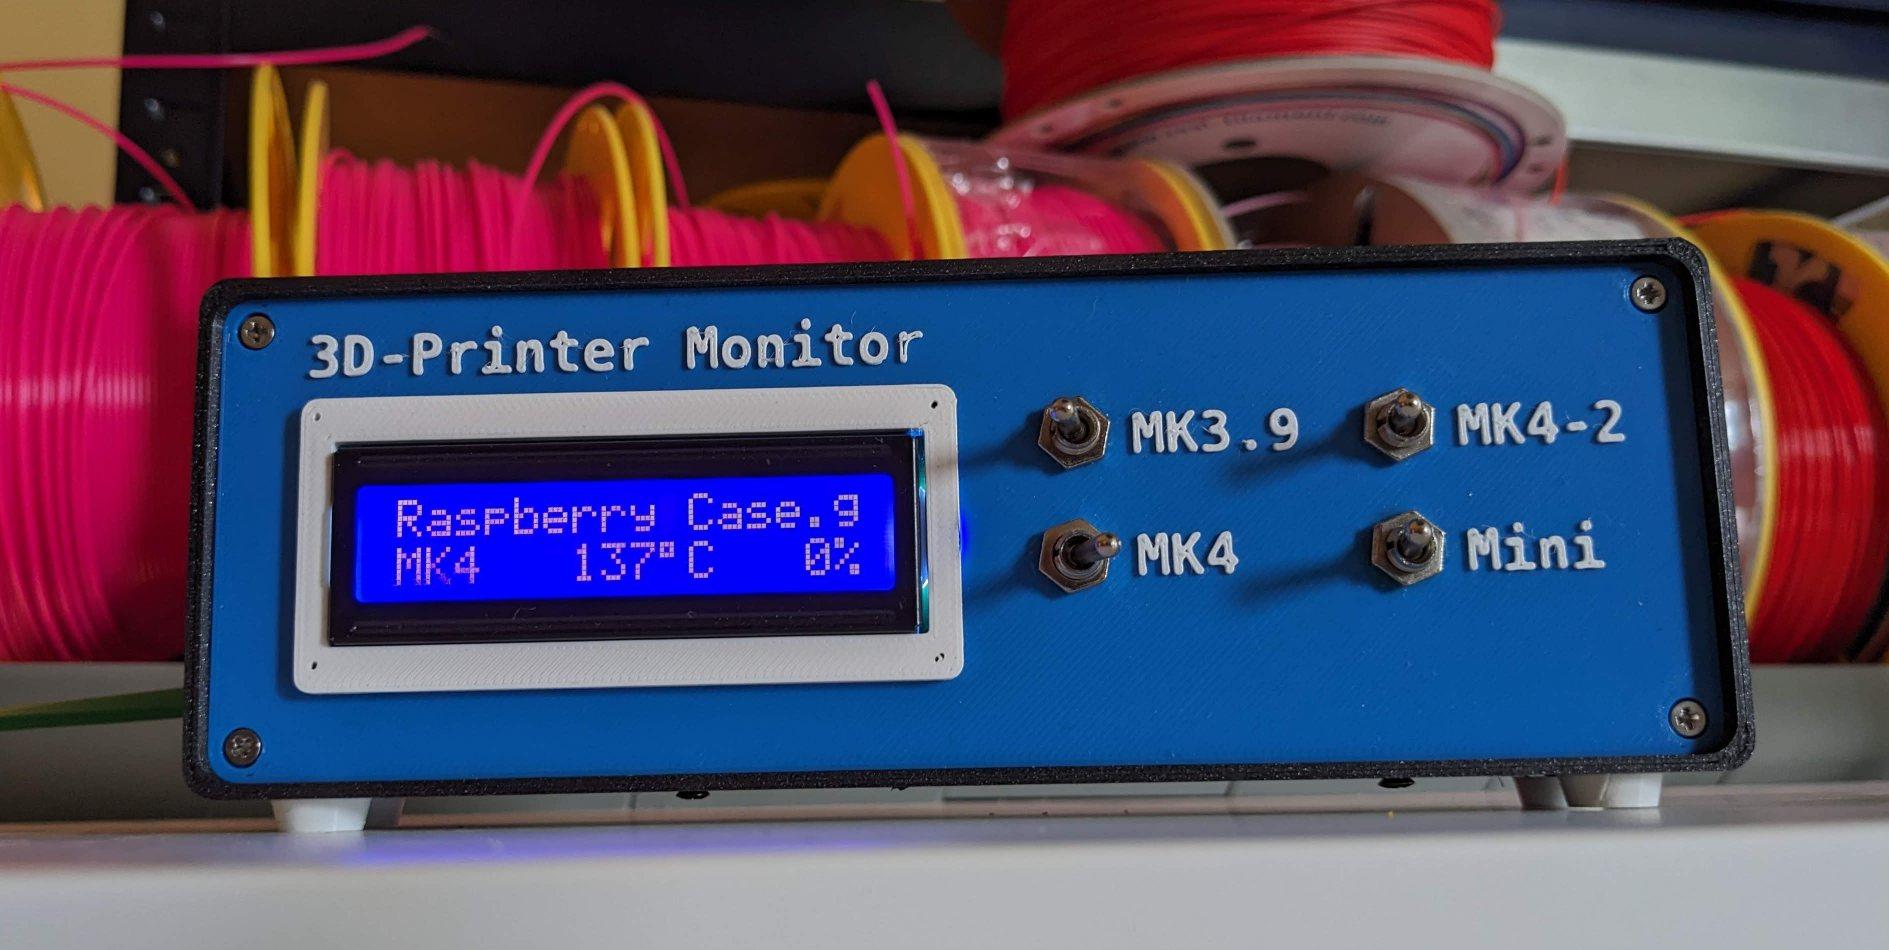 3D Printer Monitor With LCD for Up to Four 3D Printers (via Wifi or Octoprint)